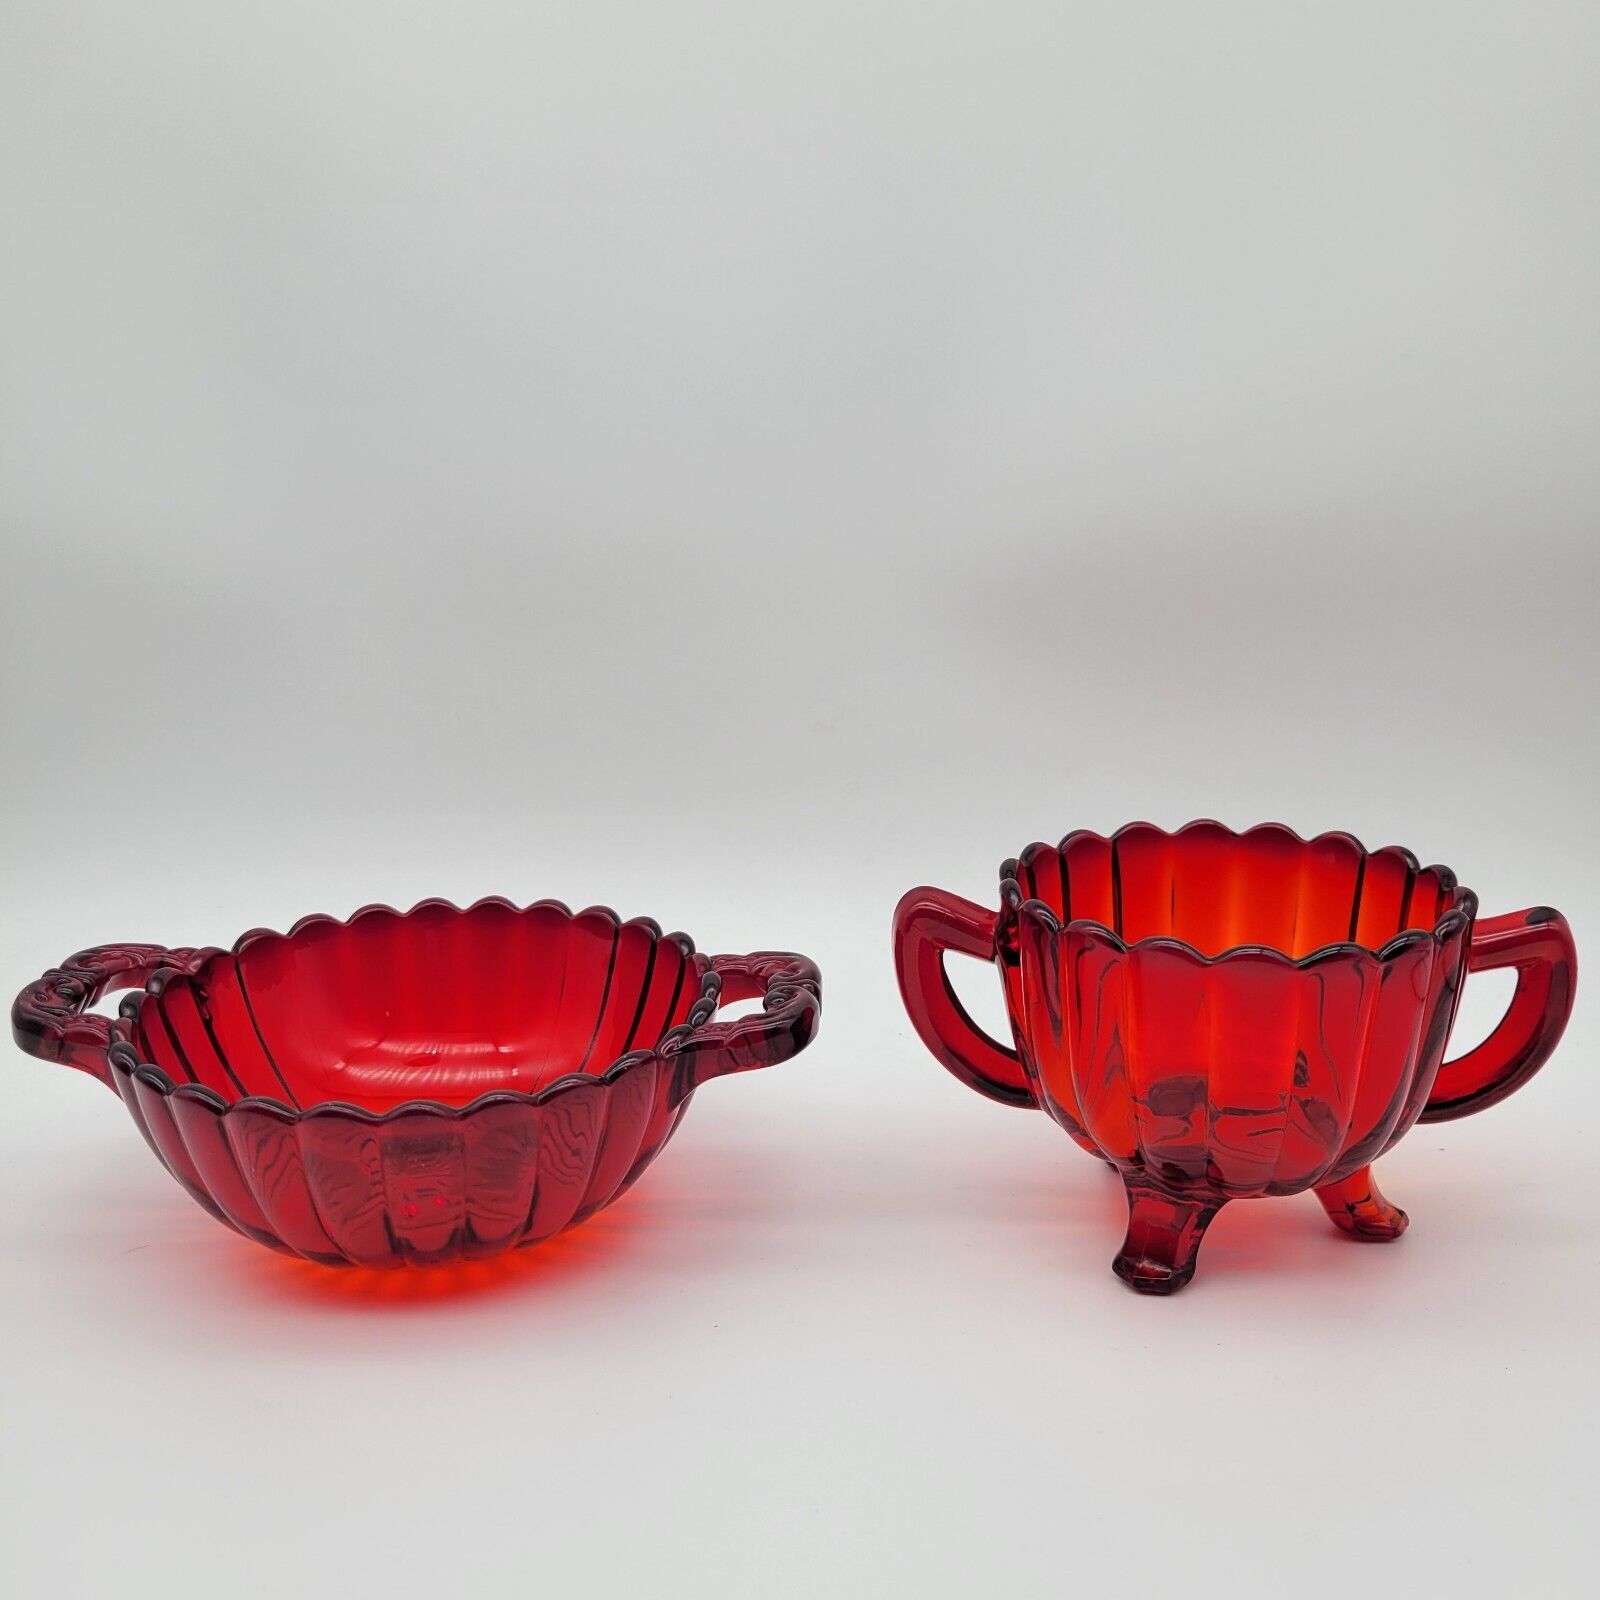 Vintage Amberina Imperial Glass 2 Bowls Deep Red Footed Sugar Bowl Cottagecore 